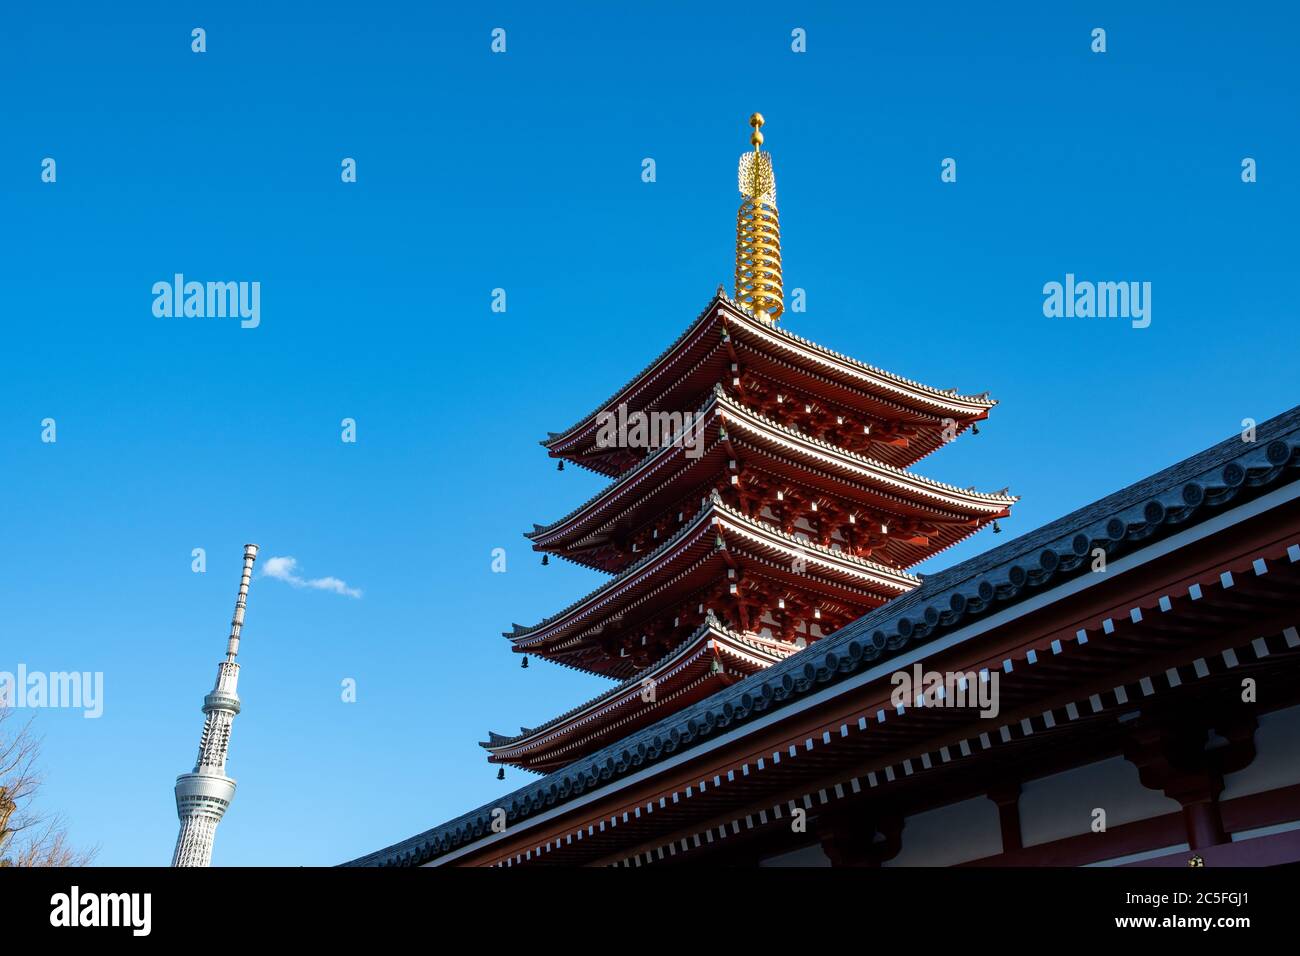 The five stories Pagoda of the Senso-ji temple and the Tokyo Skytree tower. Tokyo, Japan. Stock Photo